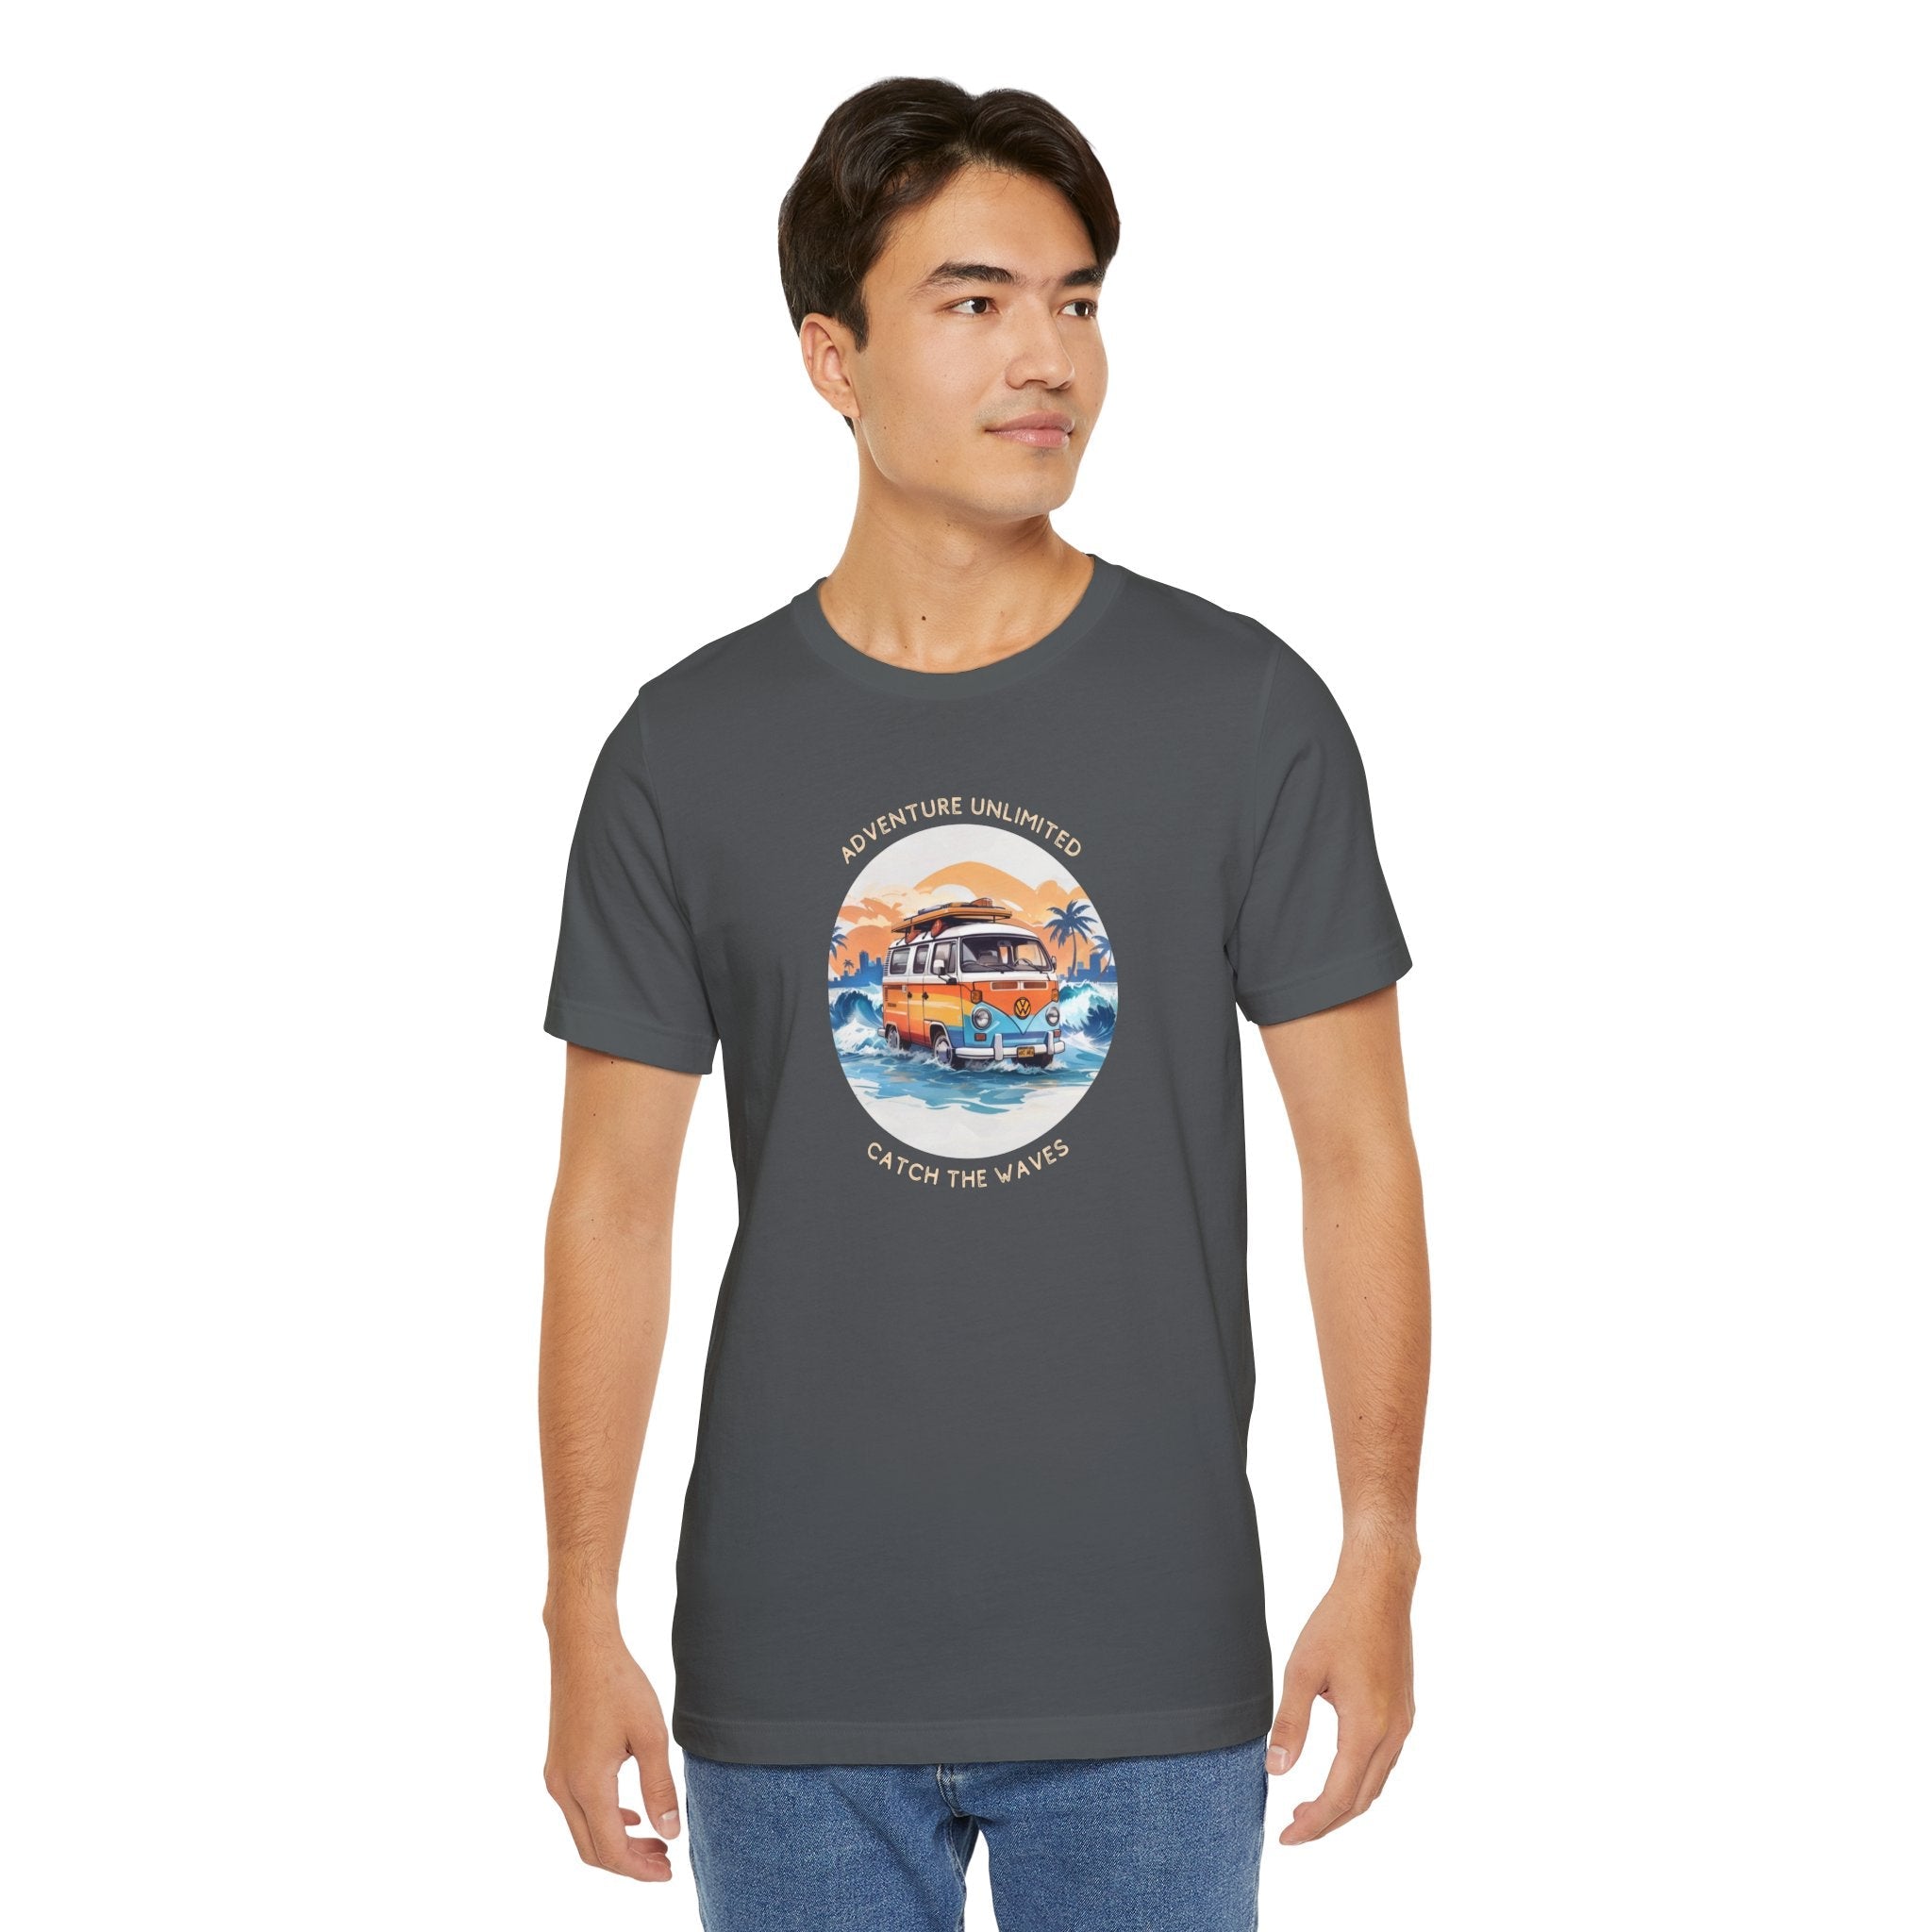 Adventure Unlimited unisex jersey tee with van graphic, direct-to-garment printed, grey shirt